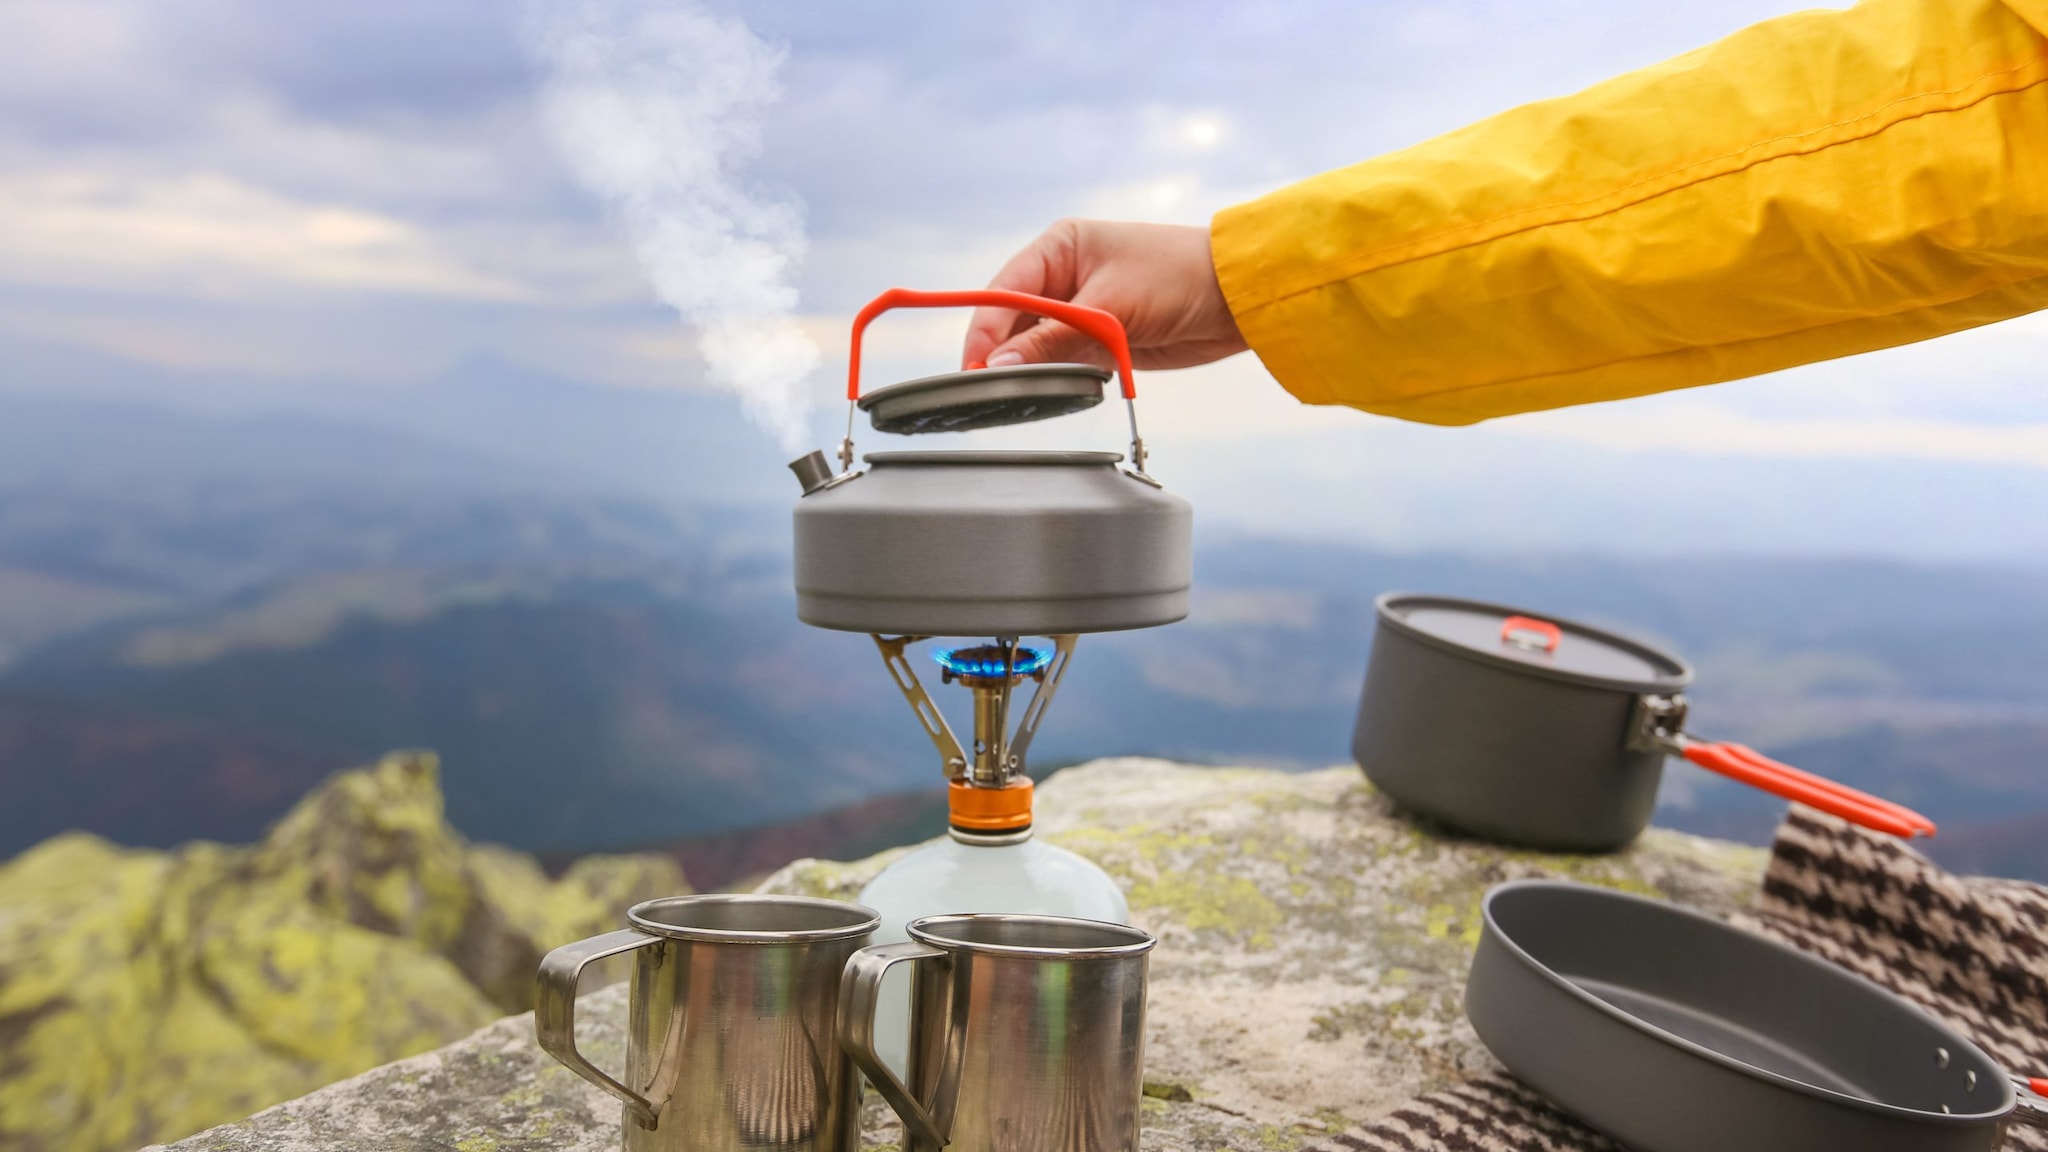 Hiker boiling water in a kettle with mountains in the background